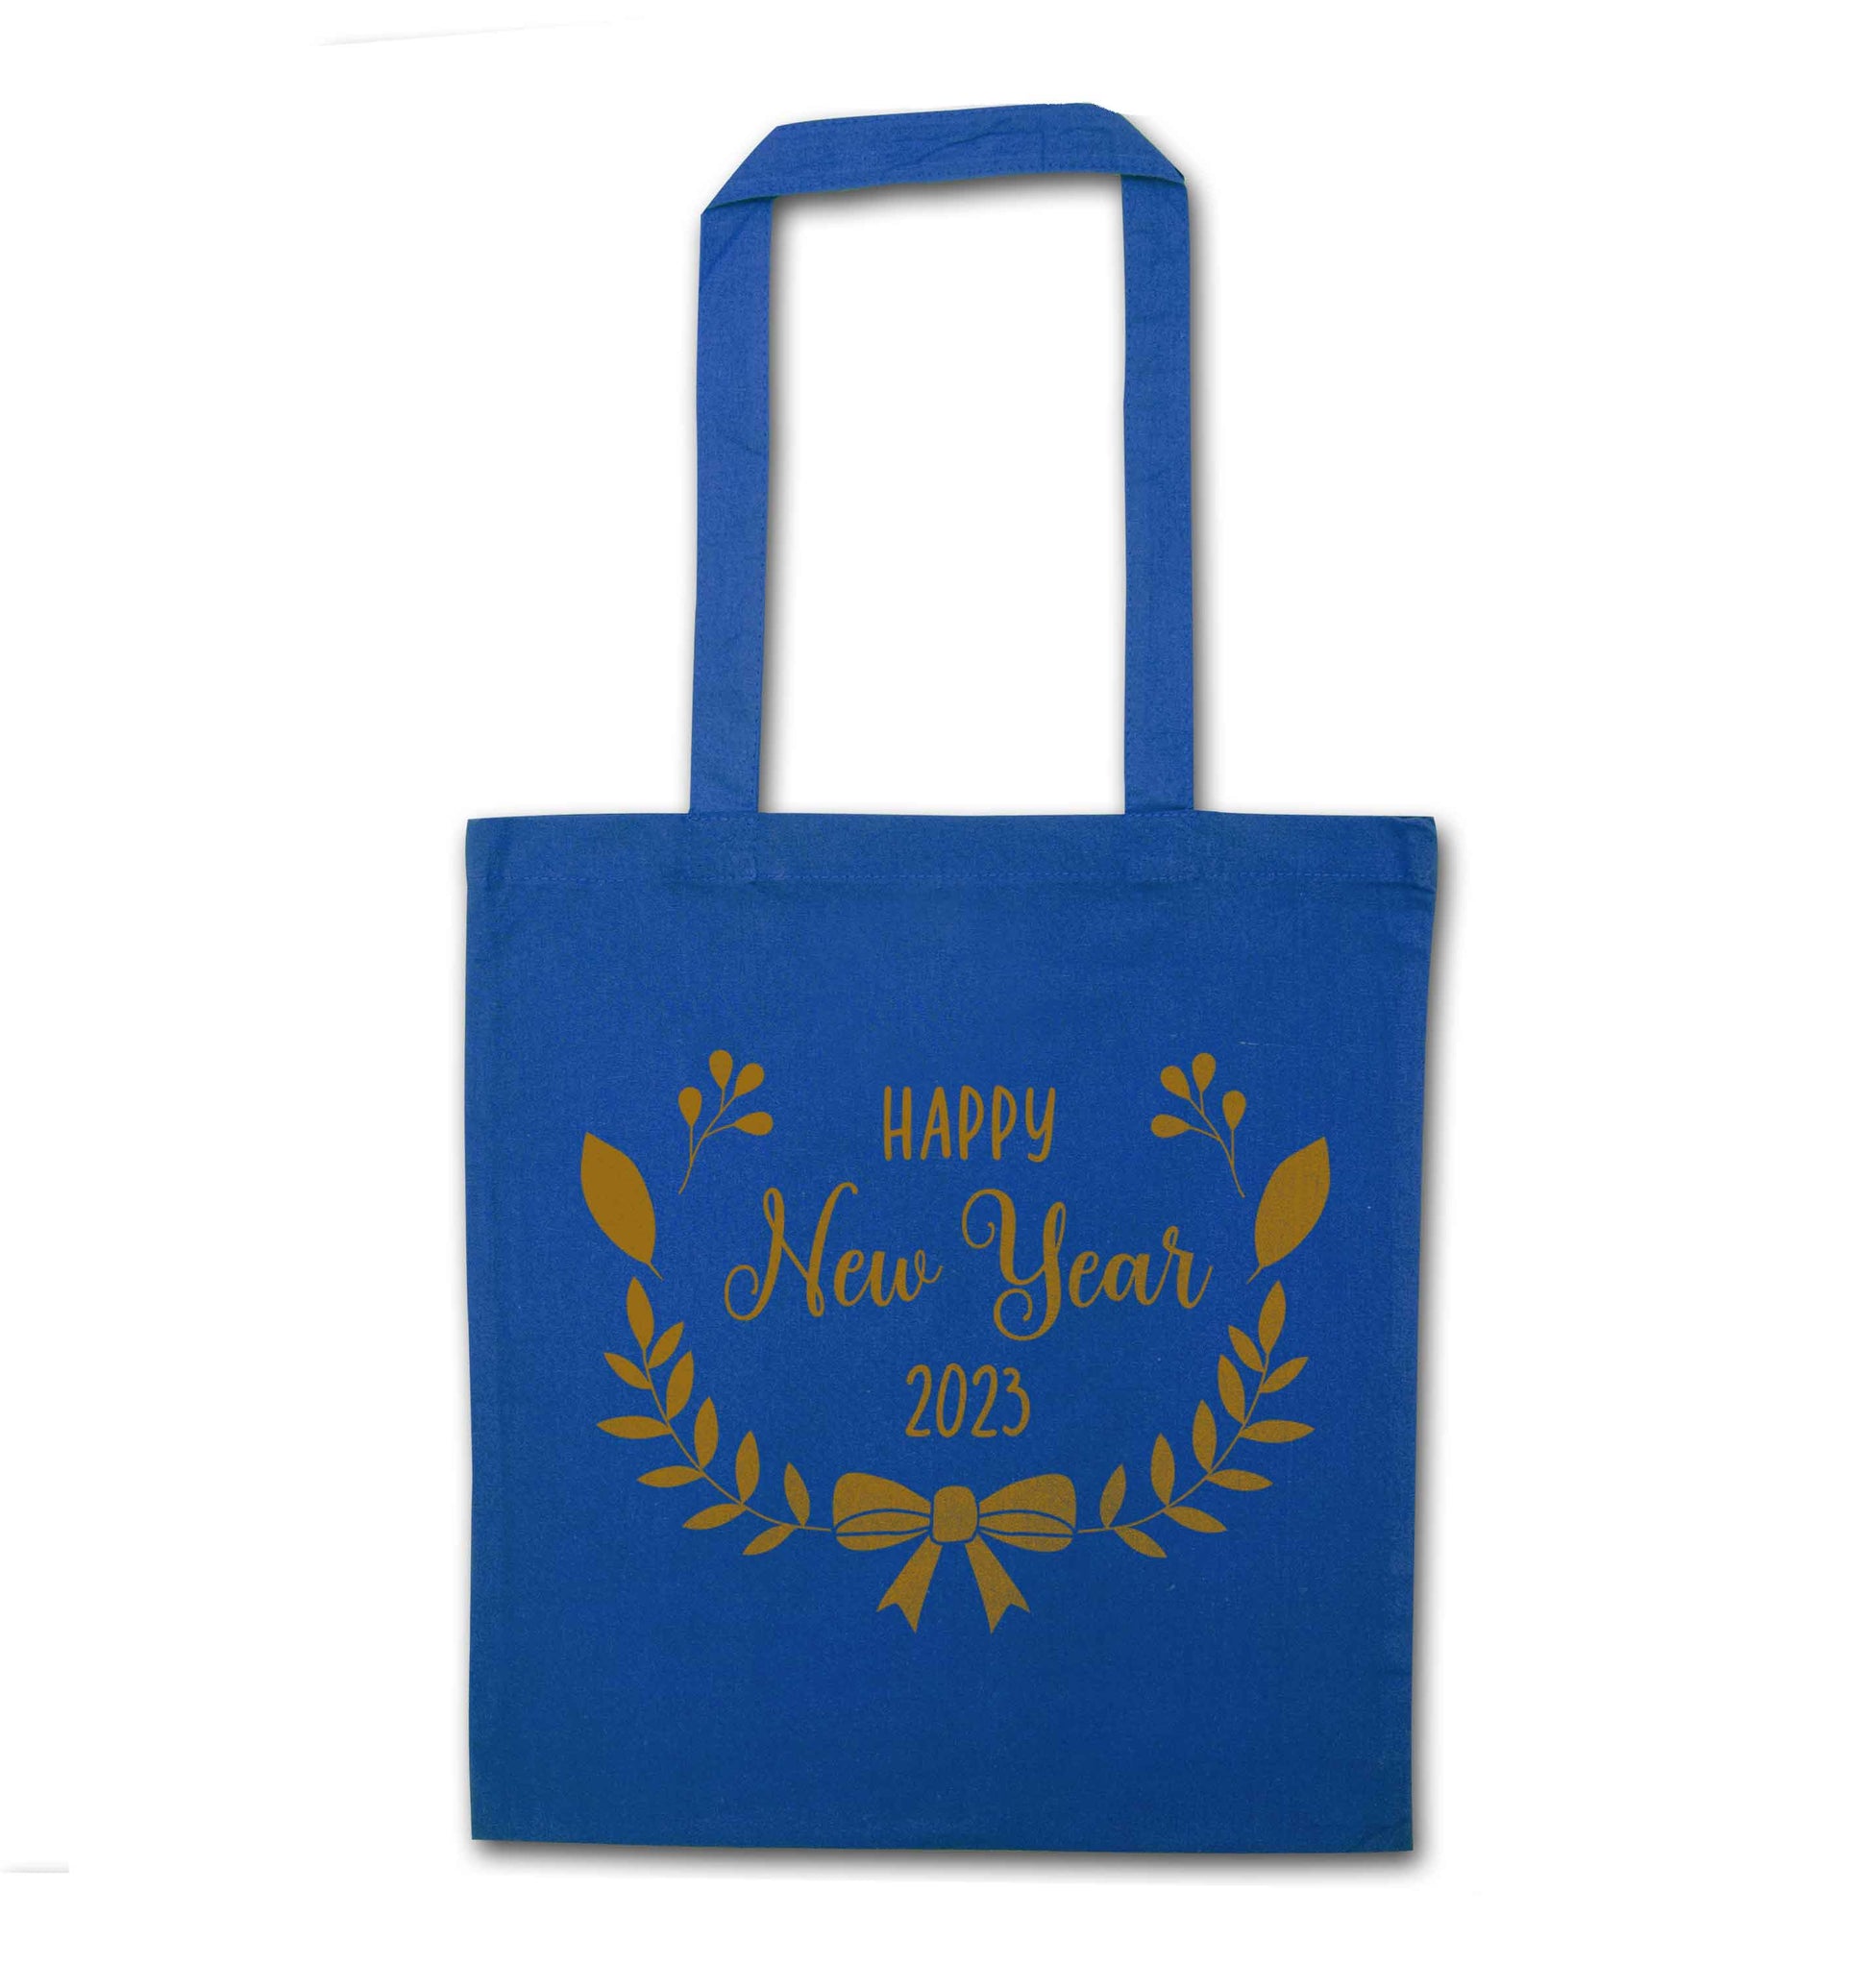 Happy New Year 2023 blue tote bag